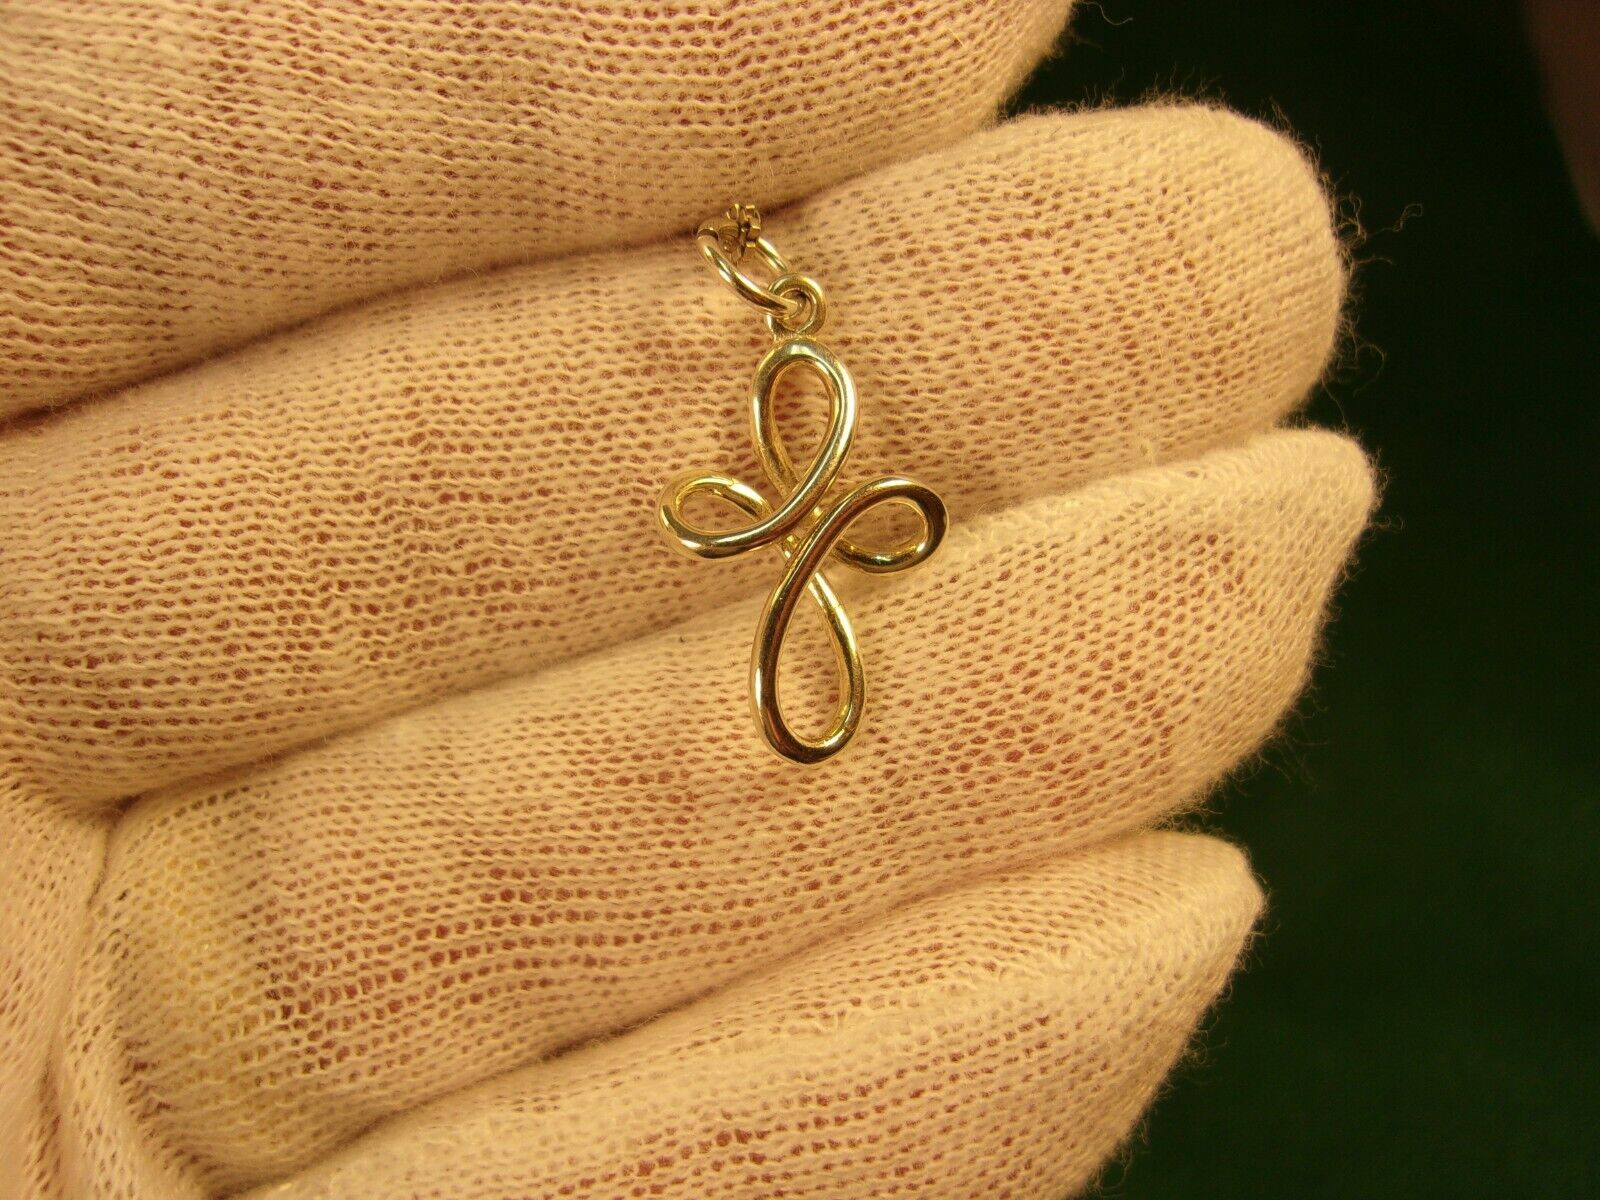 VERY NICE STERLING SILVER CHRISTIAN CROSS PENDANT, LOOPED WIRE, + 21